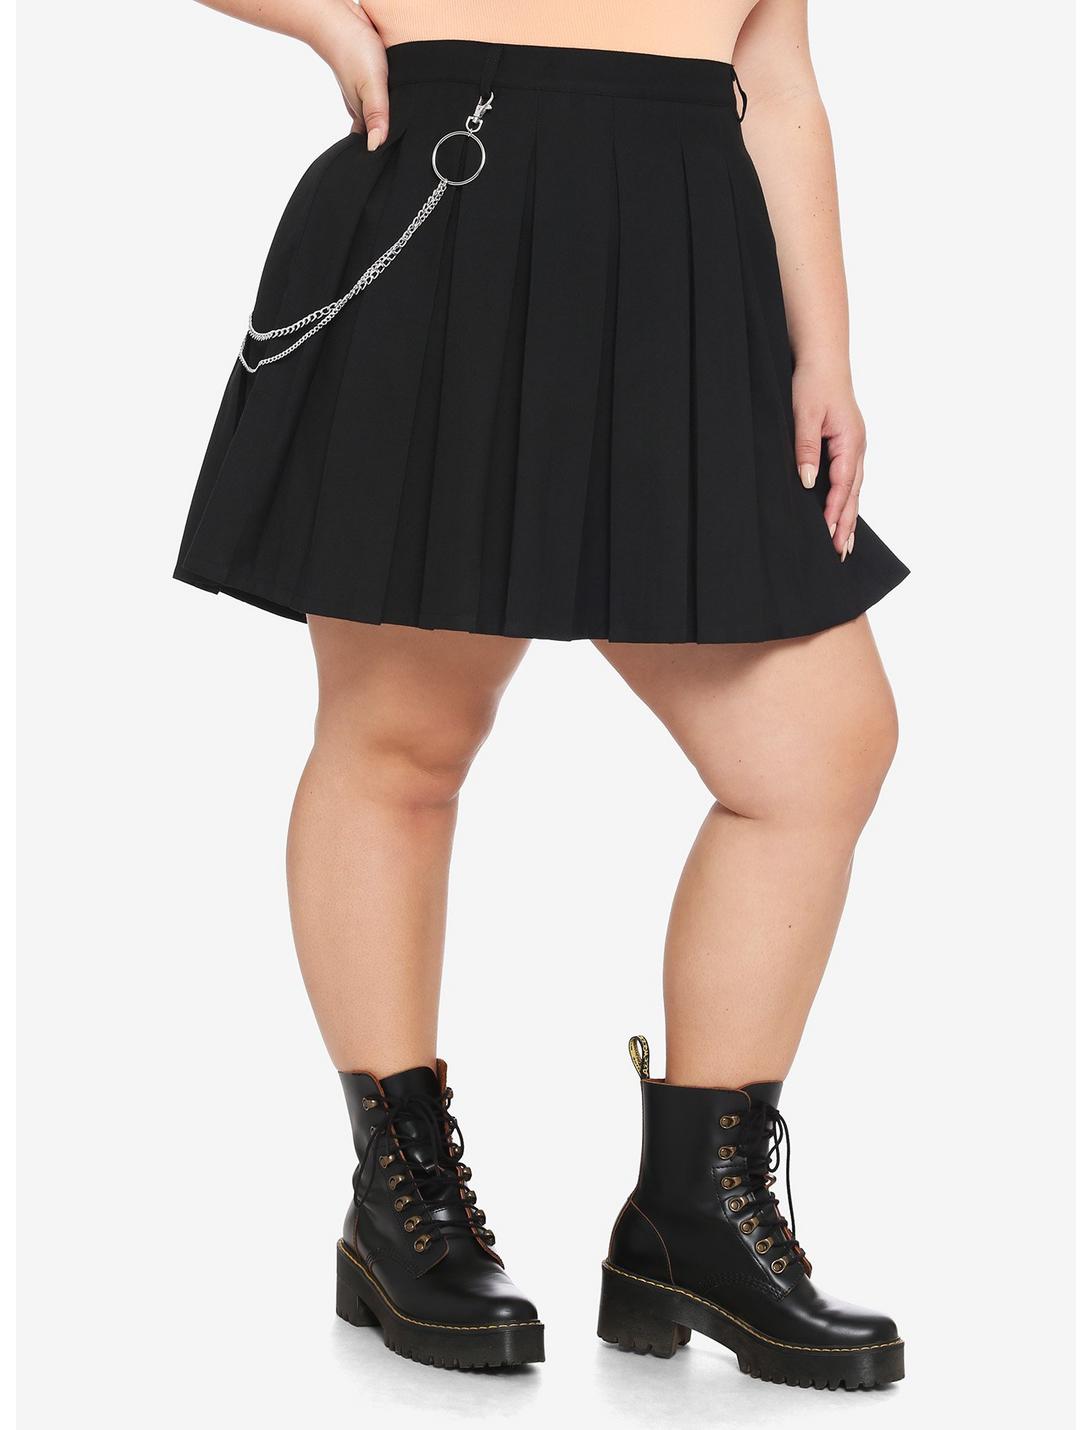 Black O-Ring Chain Pleated Skirt Plus Size, BLACK, hi-res